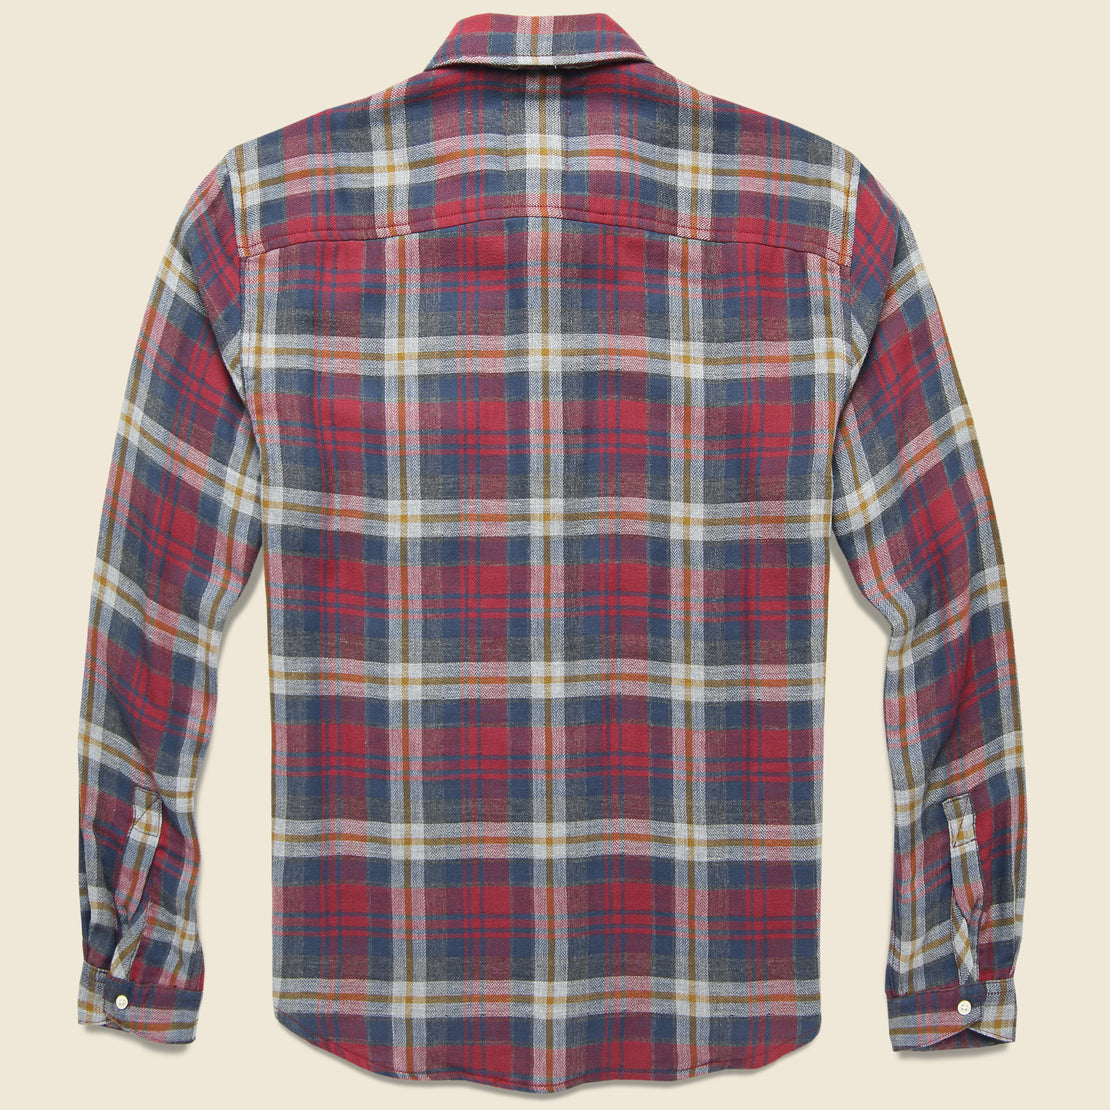 Aurora Shirt - Space Jam Red - Life After Denim - STAG Provisions - Tops - L/S Woven - Plaid